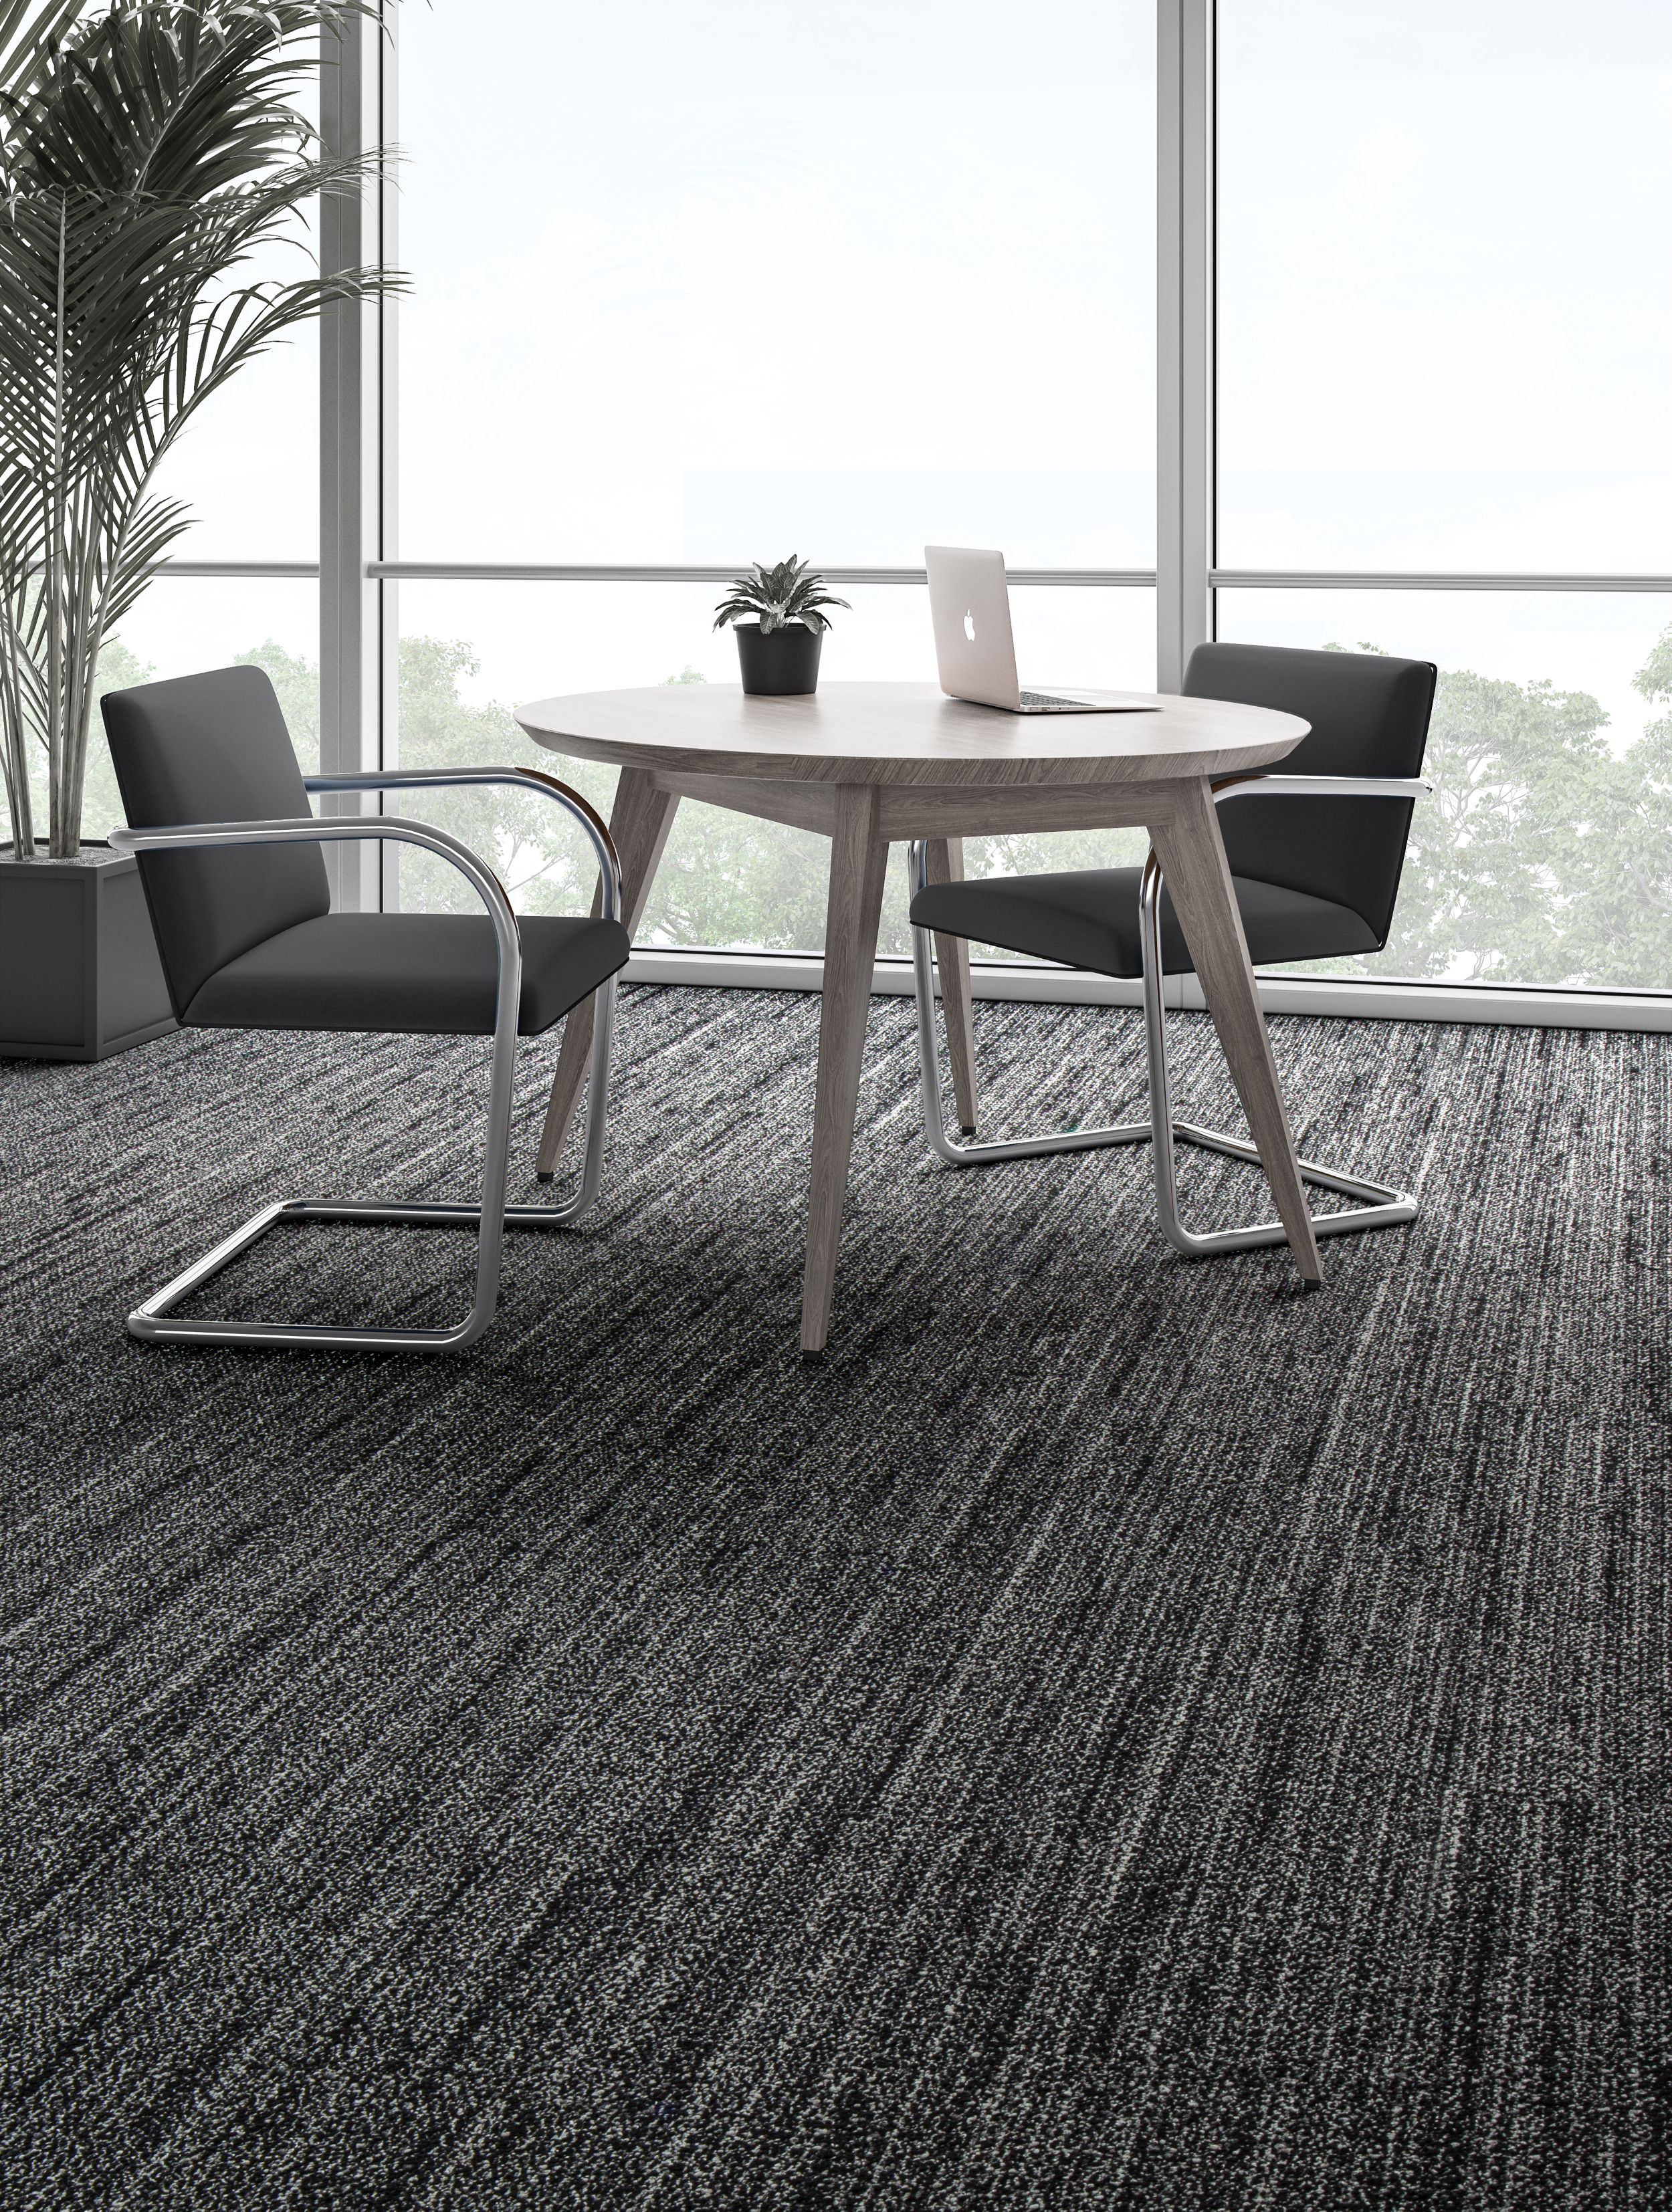 Interface WW870 plank carpet tile shown with small table and chairs afbeeldingnummer 12